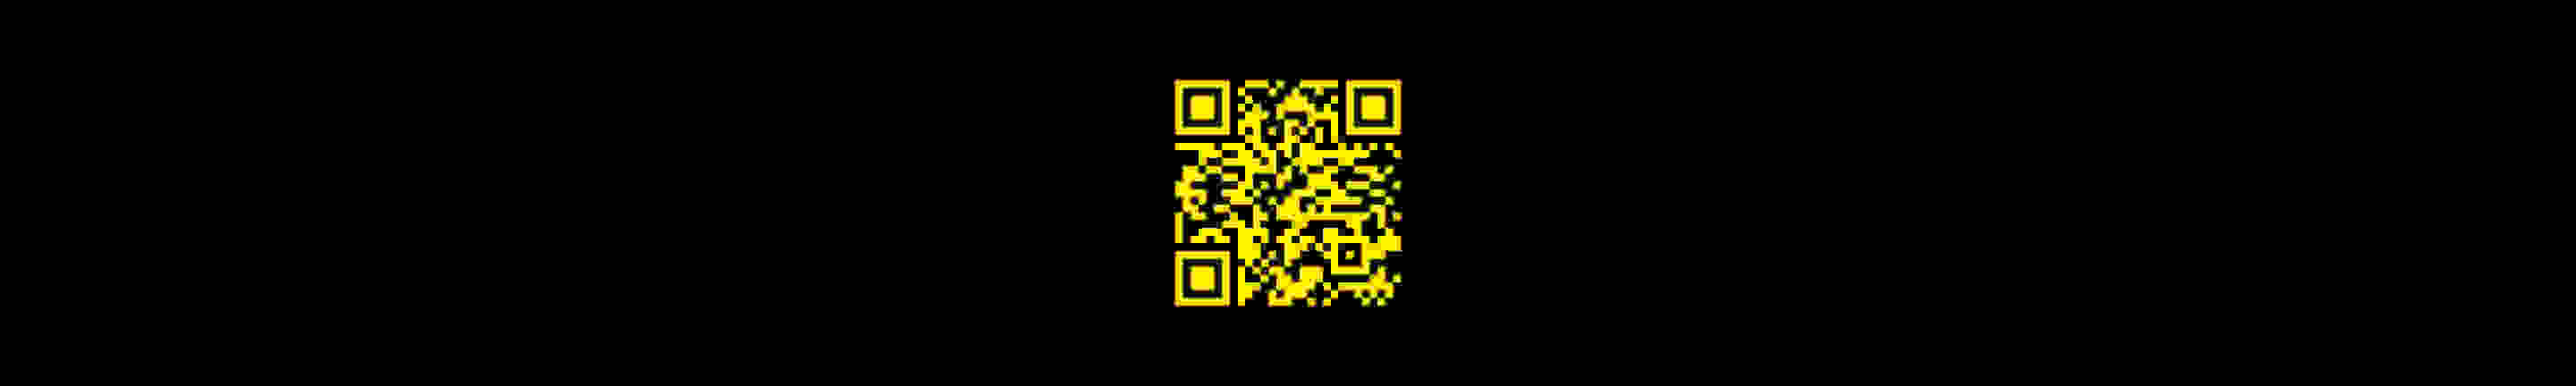 Yellow QR Code on a black background.